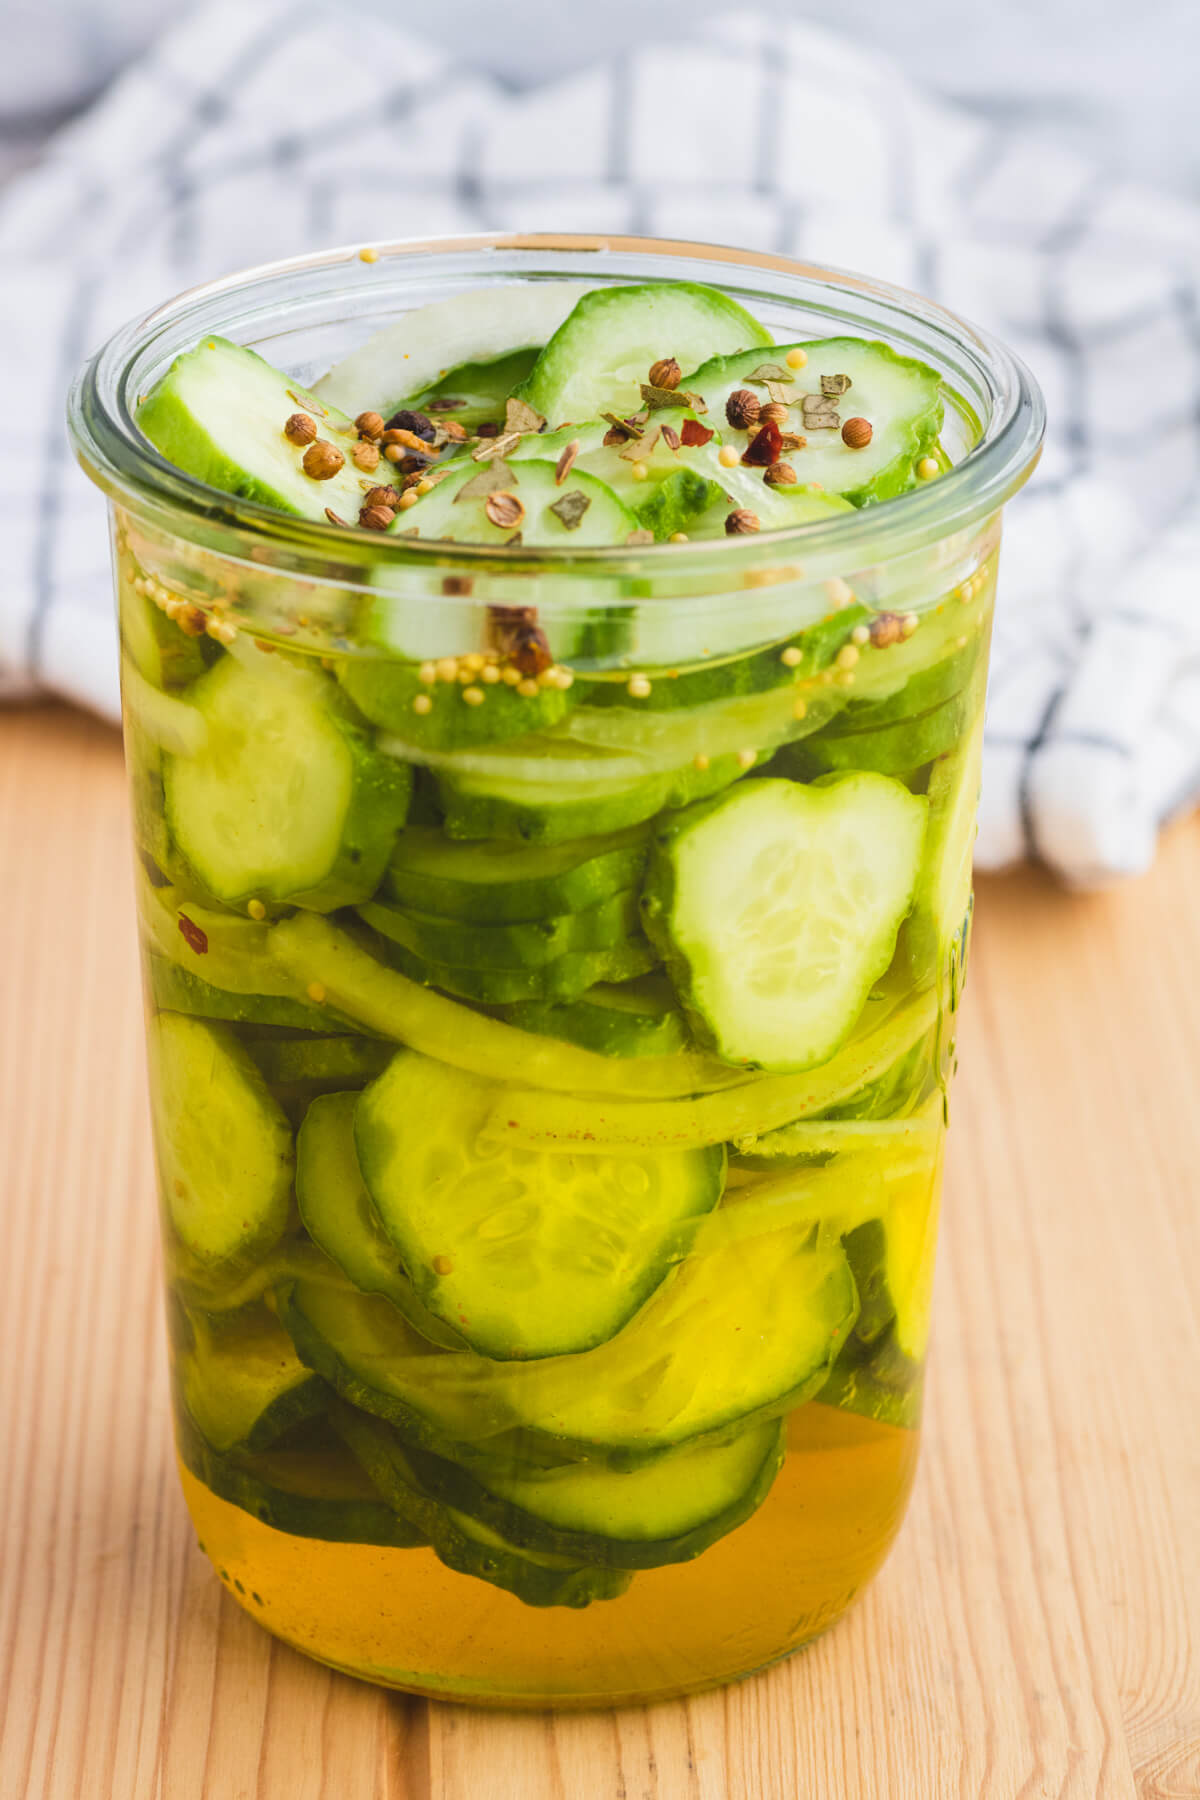 A glass jar filled with sliced cucumbers, onions, brine, and pickling spices about to be Refrigerator Bread and Butter pickles.